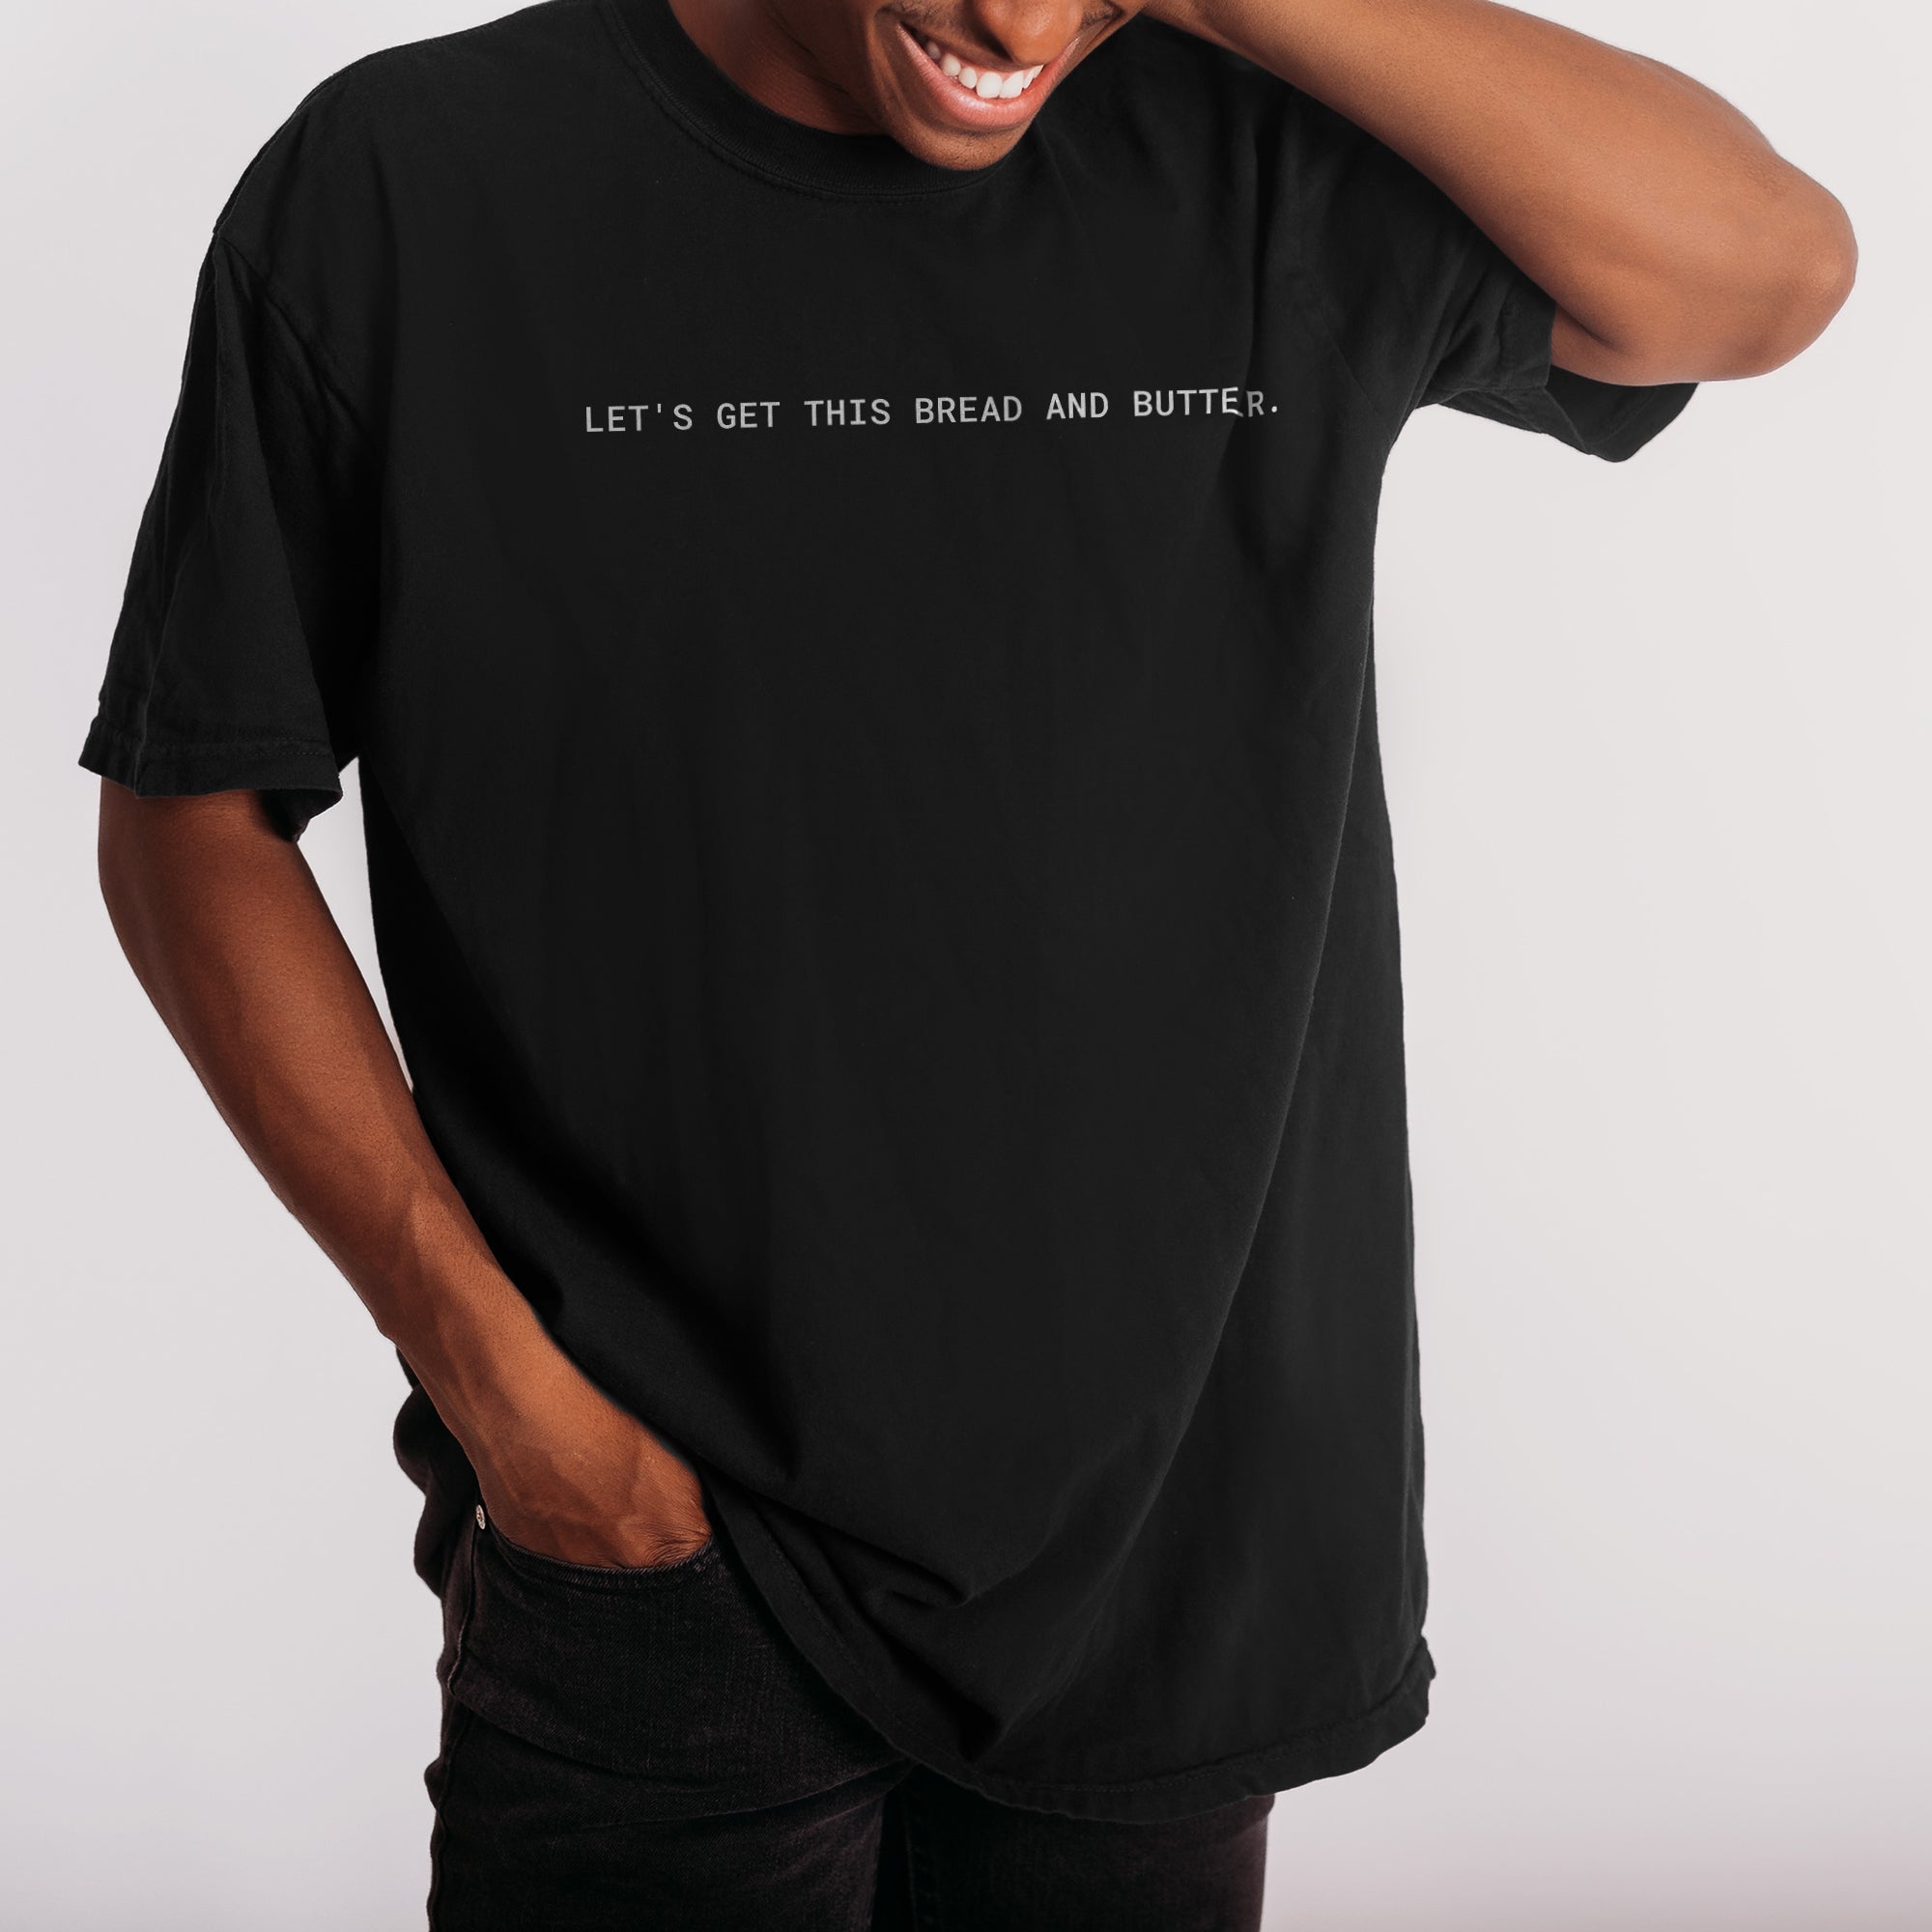 Let's Get This Bread and Butter Boyfriend Crew Tee Solid Black Closeup Artwork and Texture